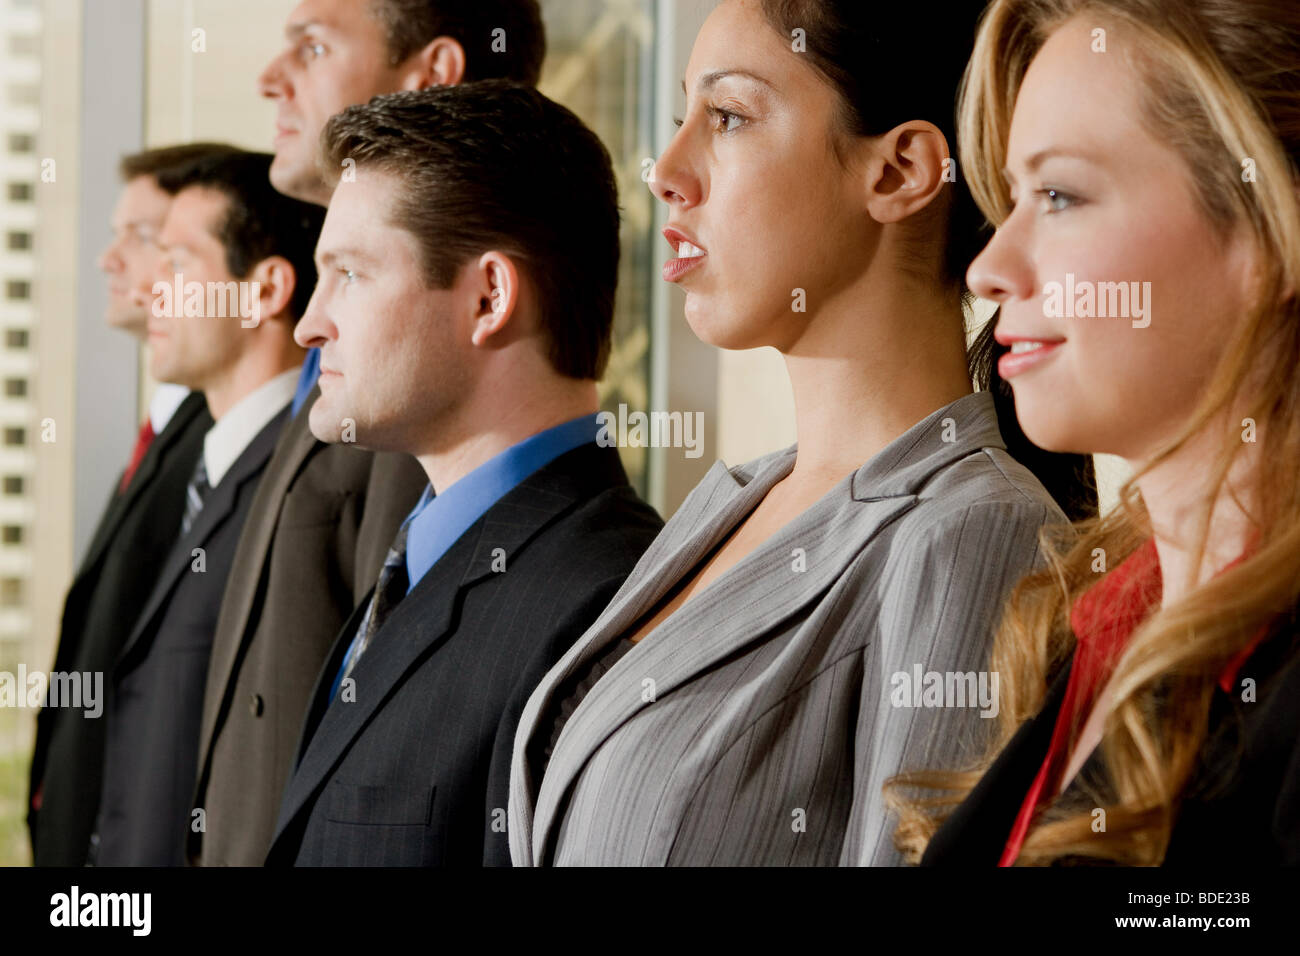 Business people. Sales force. Stock Photo